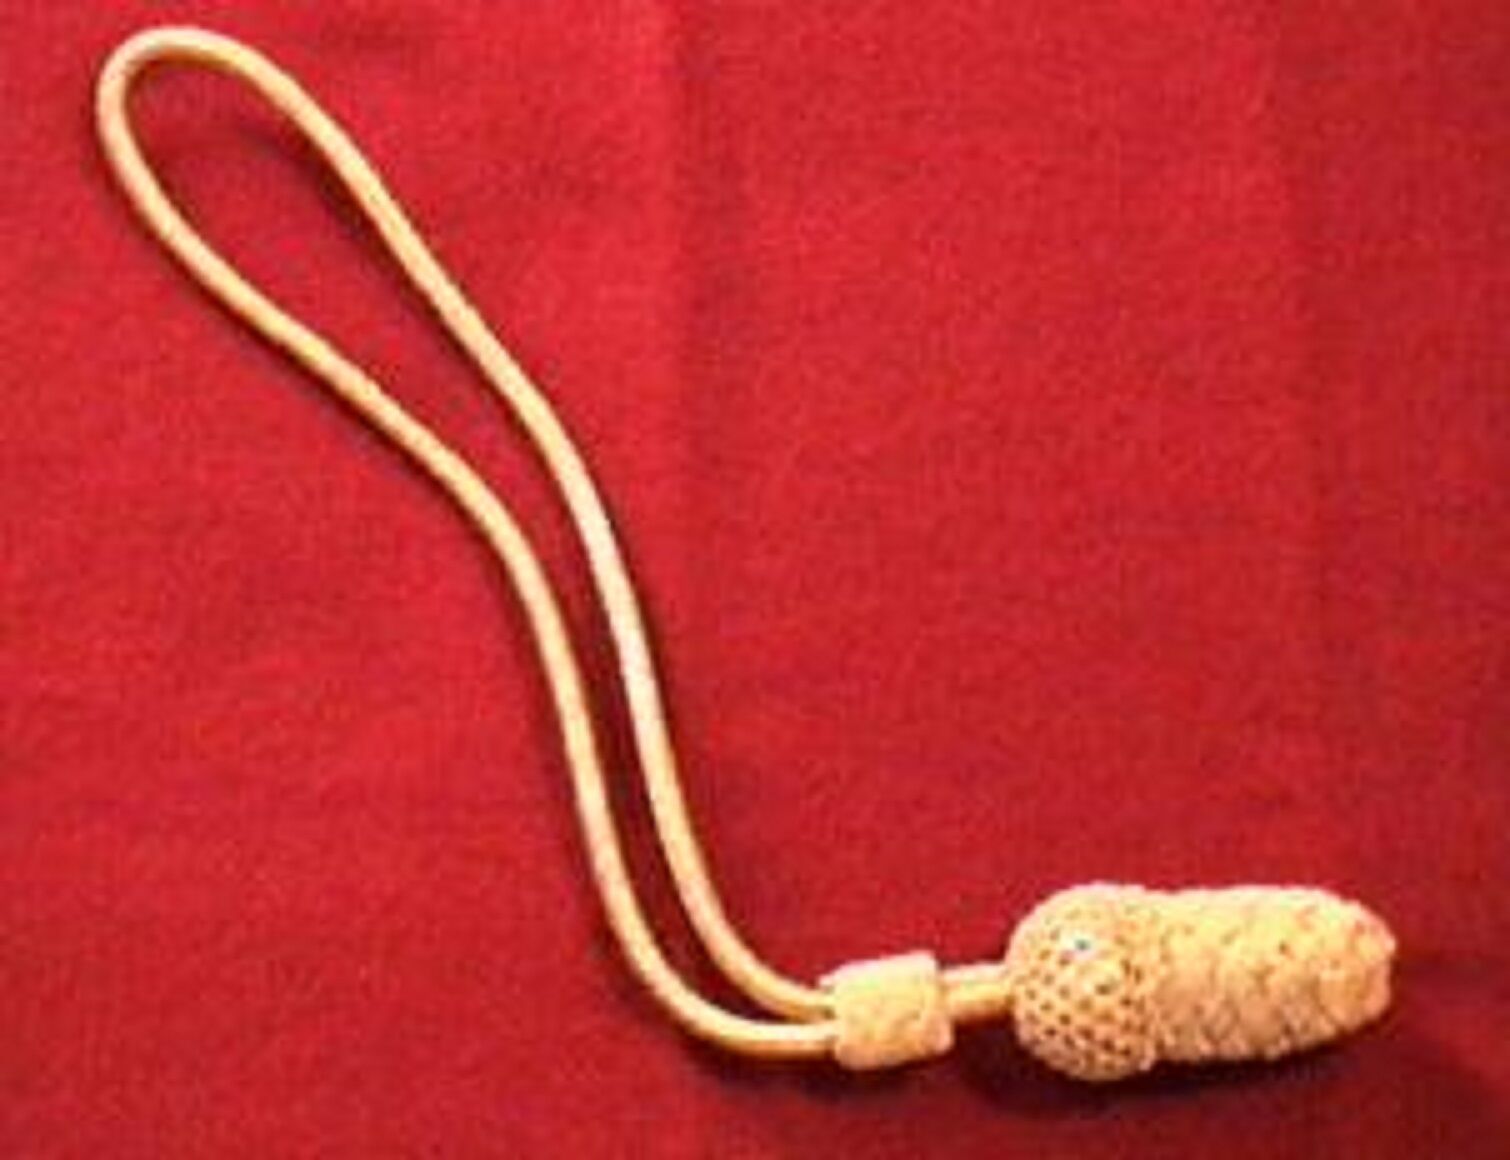 NICE QUALITY CIVIL WAR STYLE GOLD ACORN SWORD KNOT LOOKS GREAT ON ANY SABER 